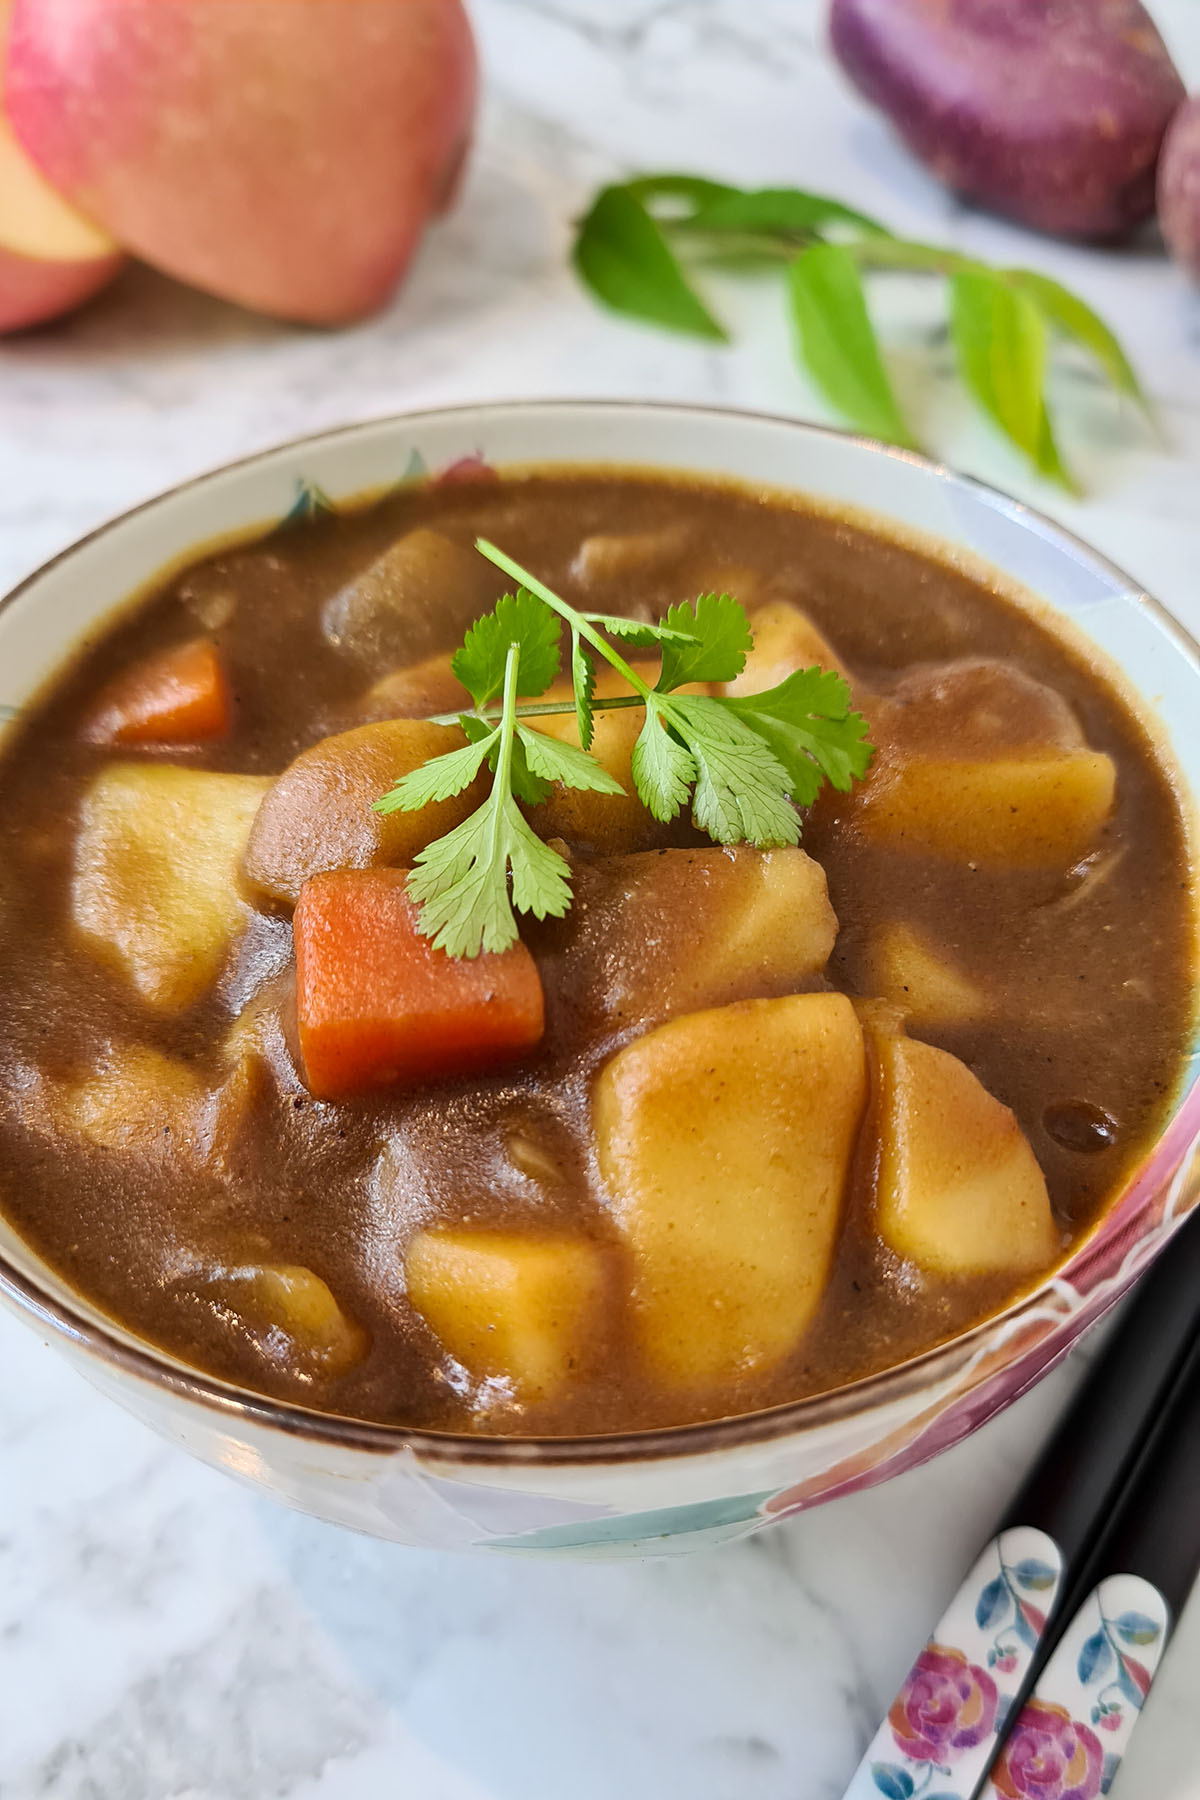 Japanese curry with potatoes and carrots